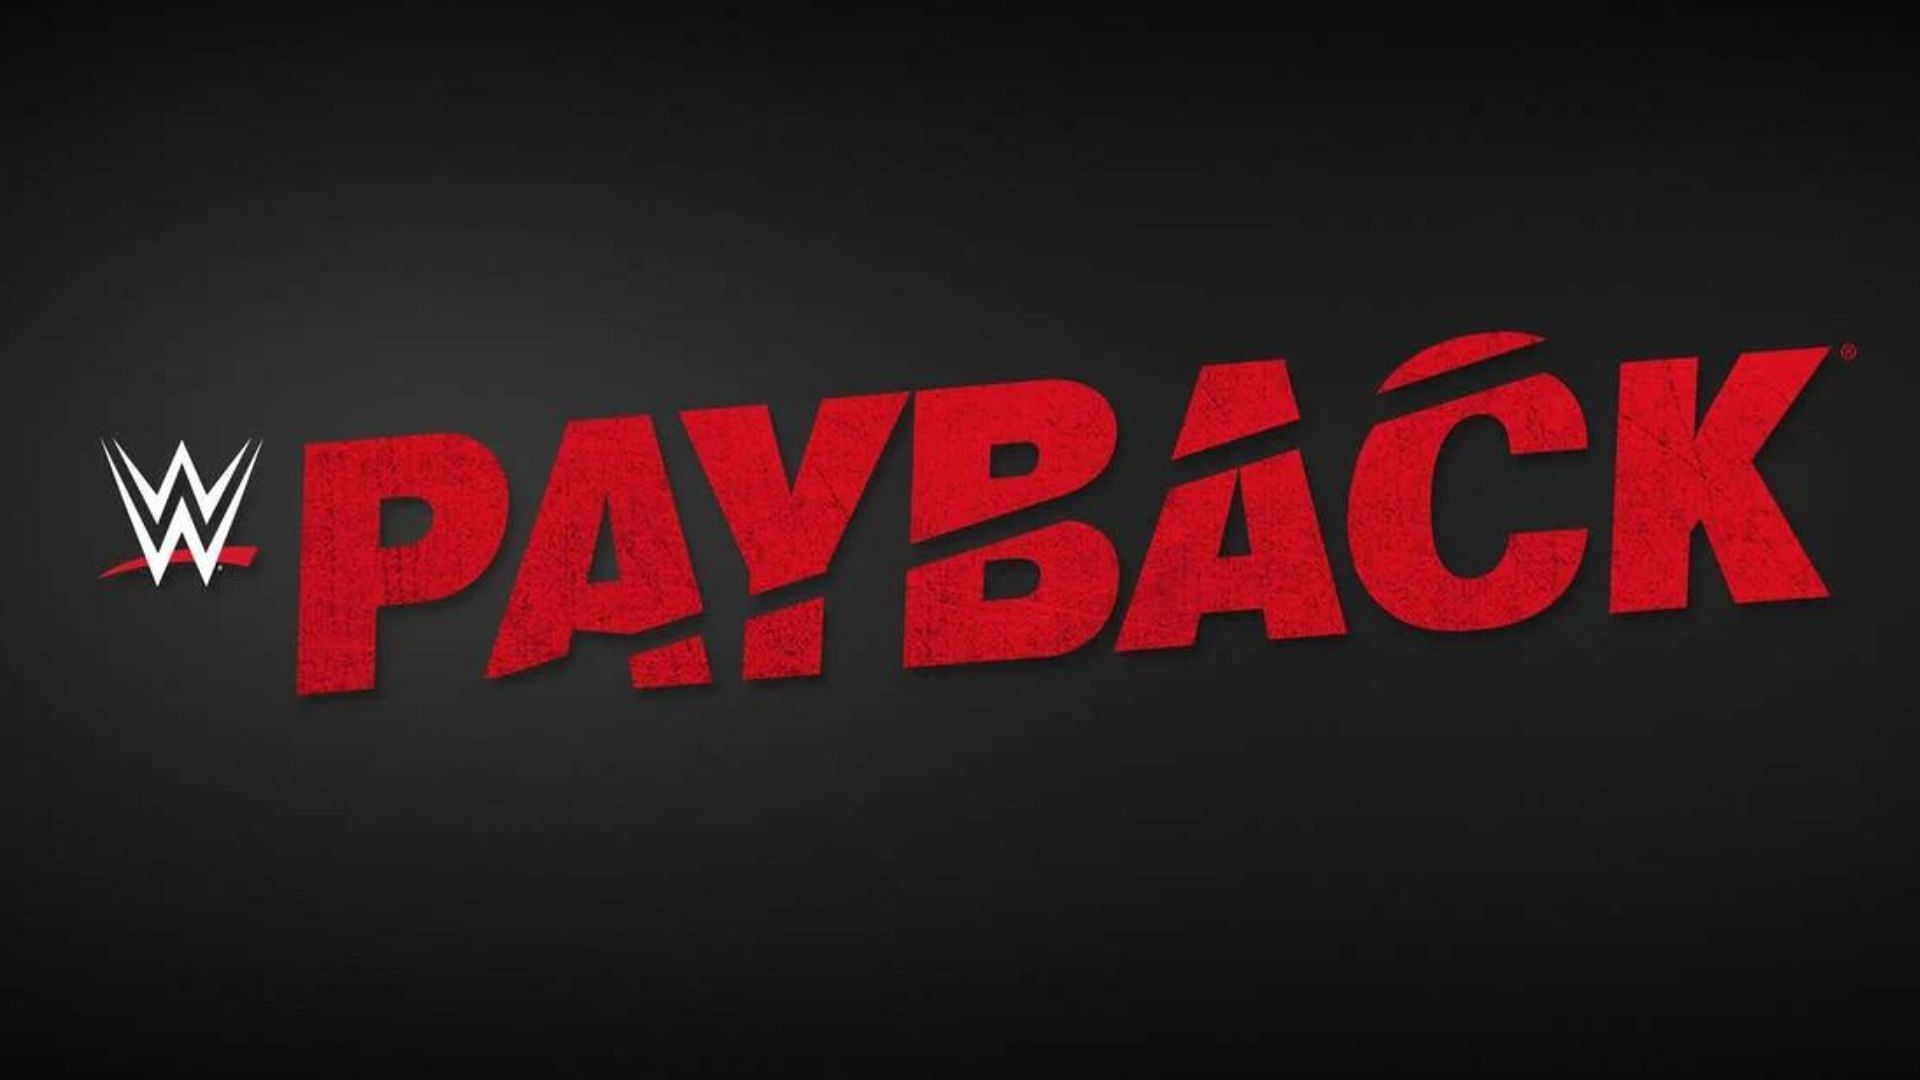 PAyback will take place next month in Pittsburgh. 